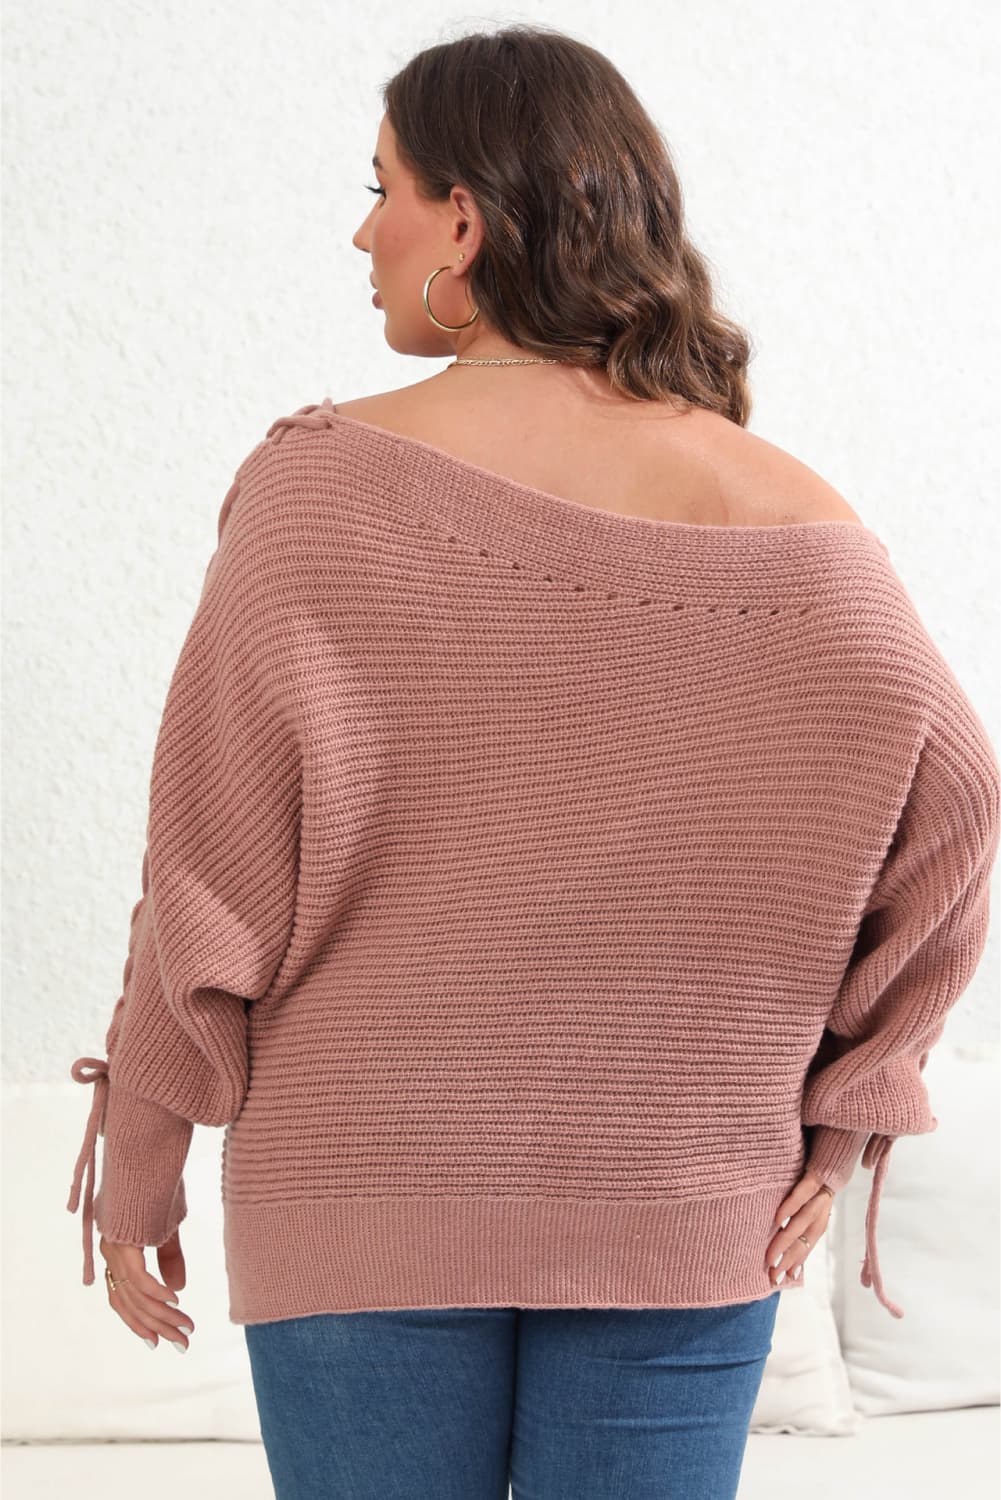 Rosy Brown Plus Size One Shoulder Beaded Sweater Clothing